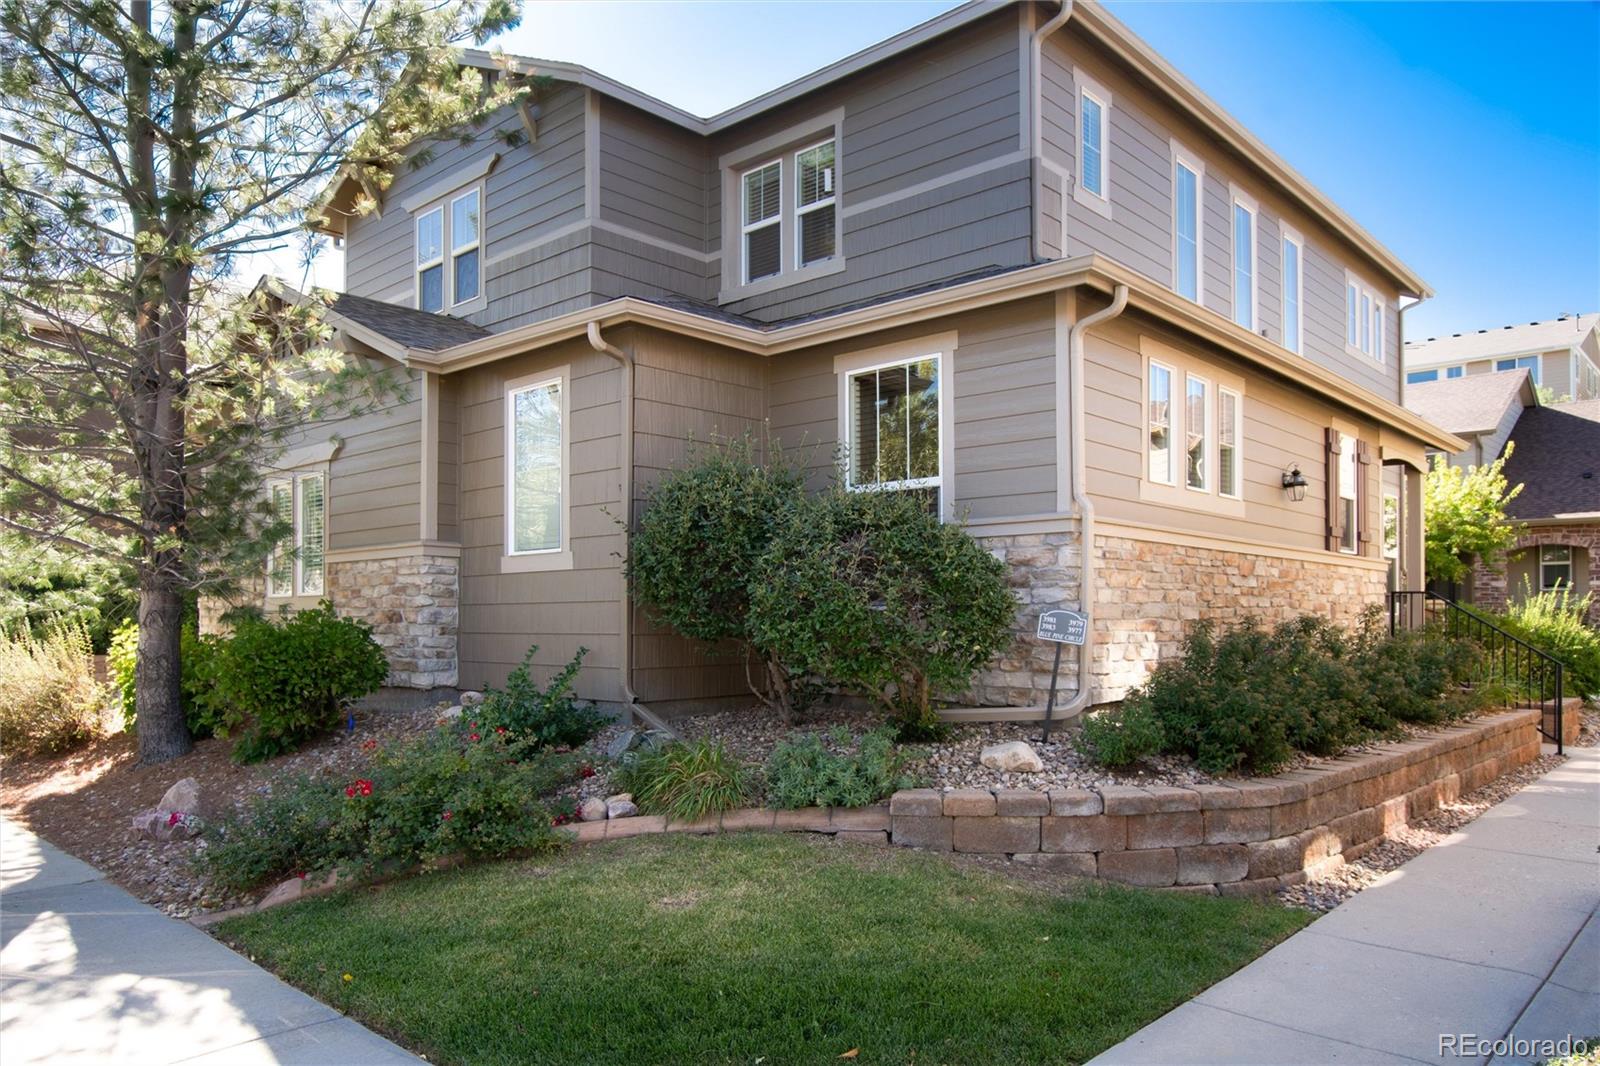 3981  blue pine circle, highlands ranch sold home. Closed on 2023-12-28 for $590,000.